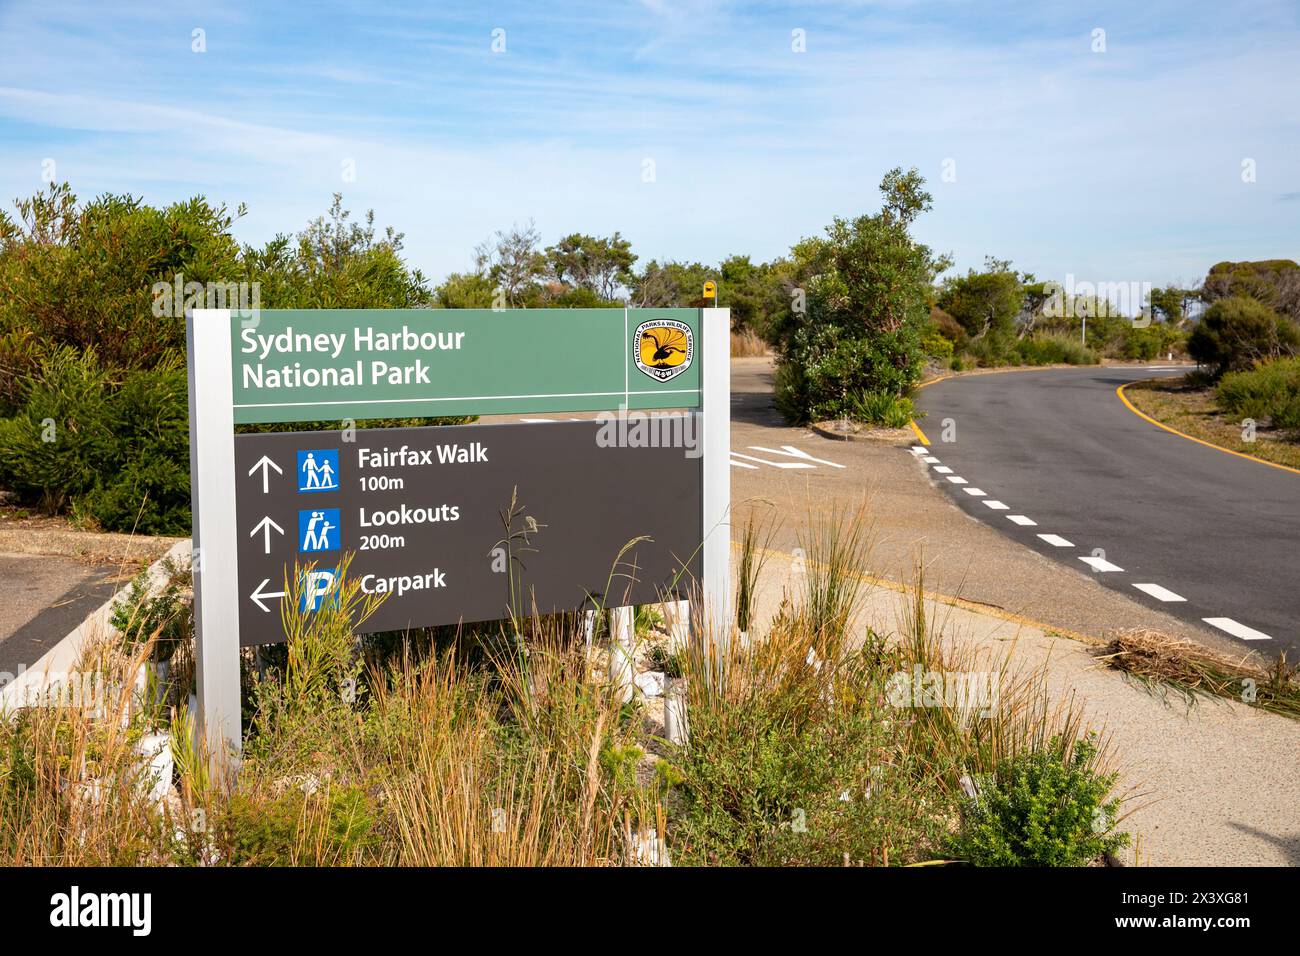 North Head Manly, part of Sydney Harbour national park, with information sign directions to Fairfax walk and lookouts, Sydney,NSW,Australia Stock Photo